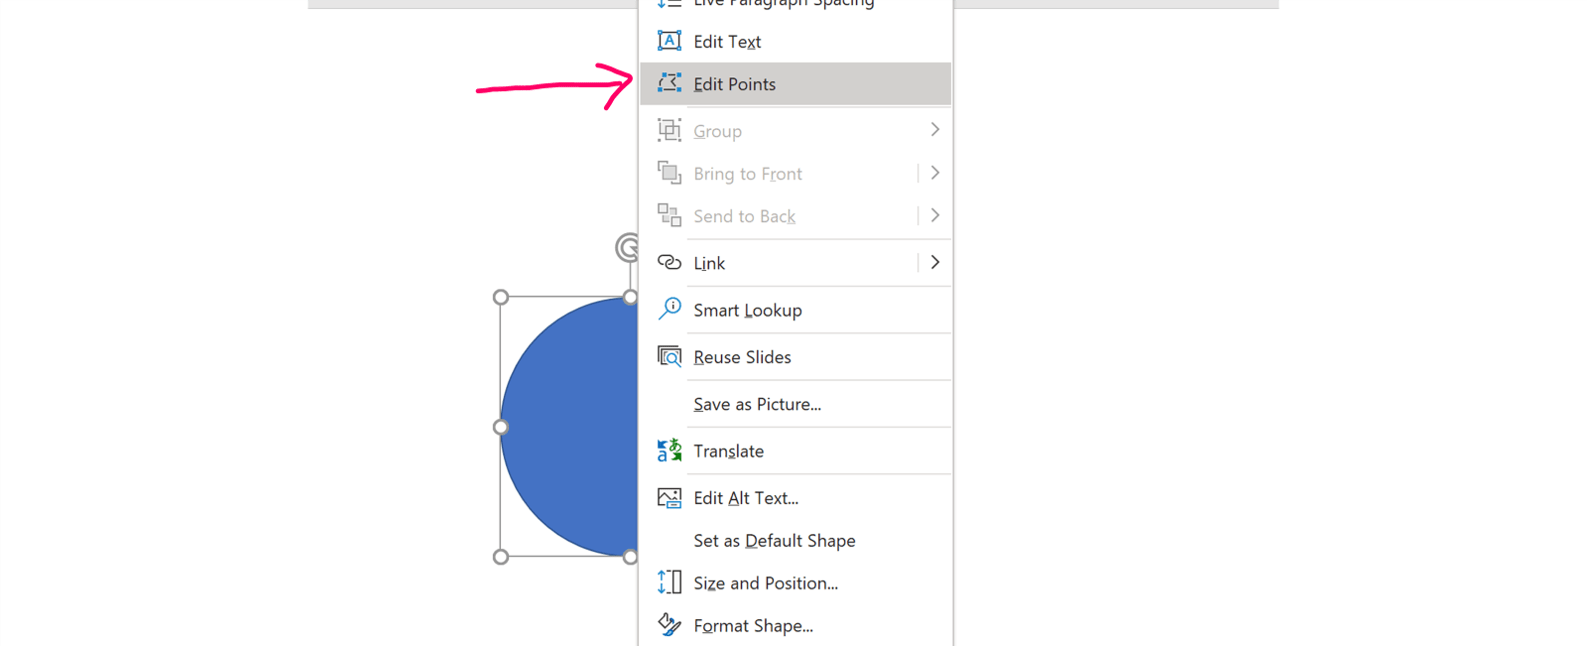 Screenshot of the right-click menu in PowerPoint showing where the Edit Points tool is located